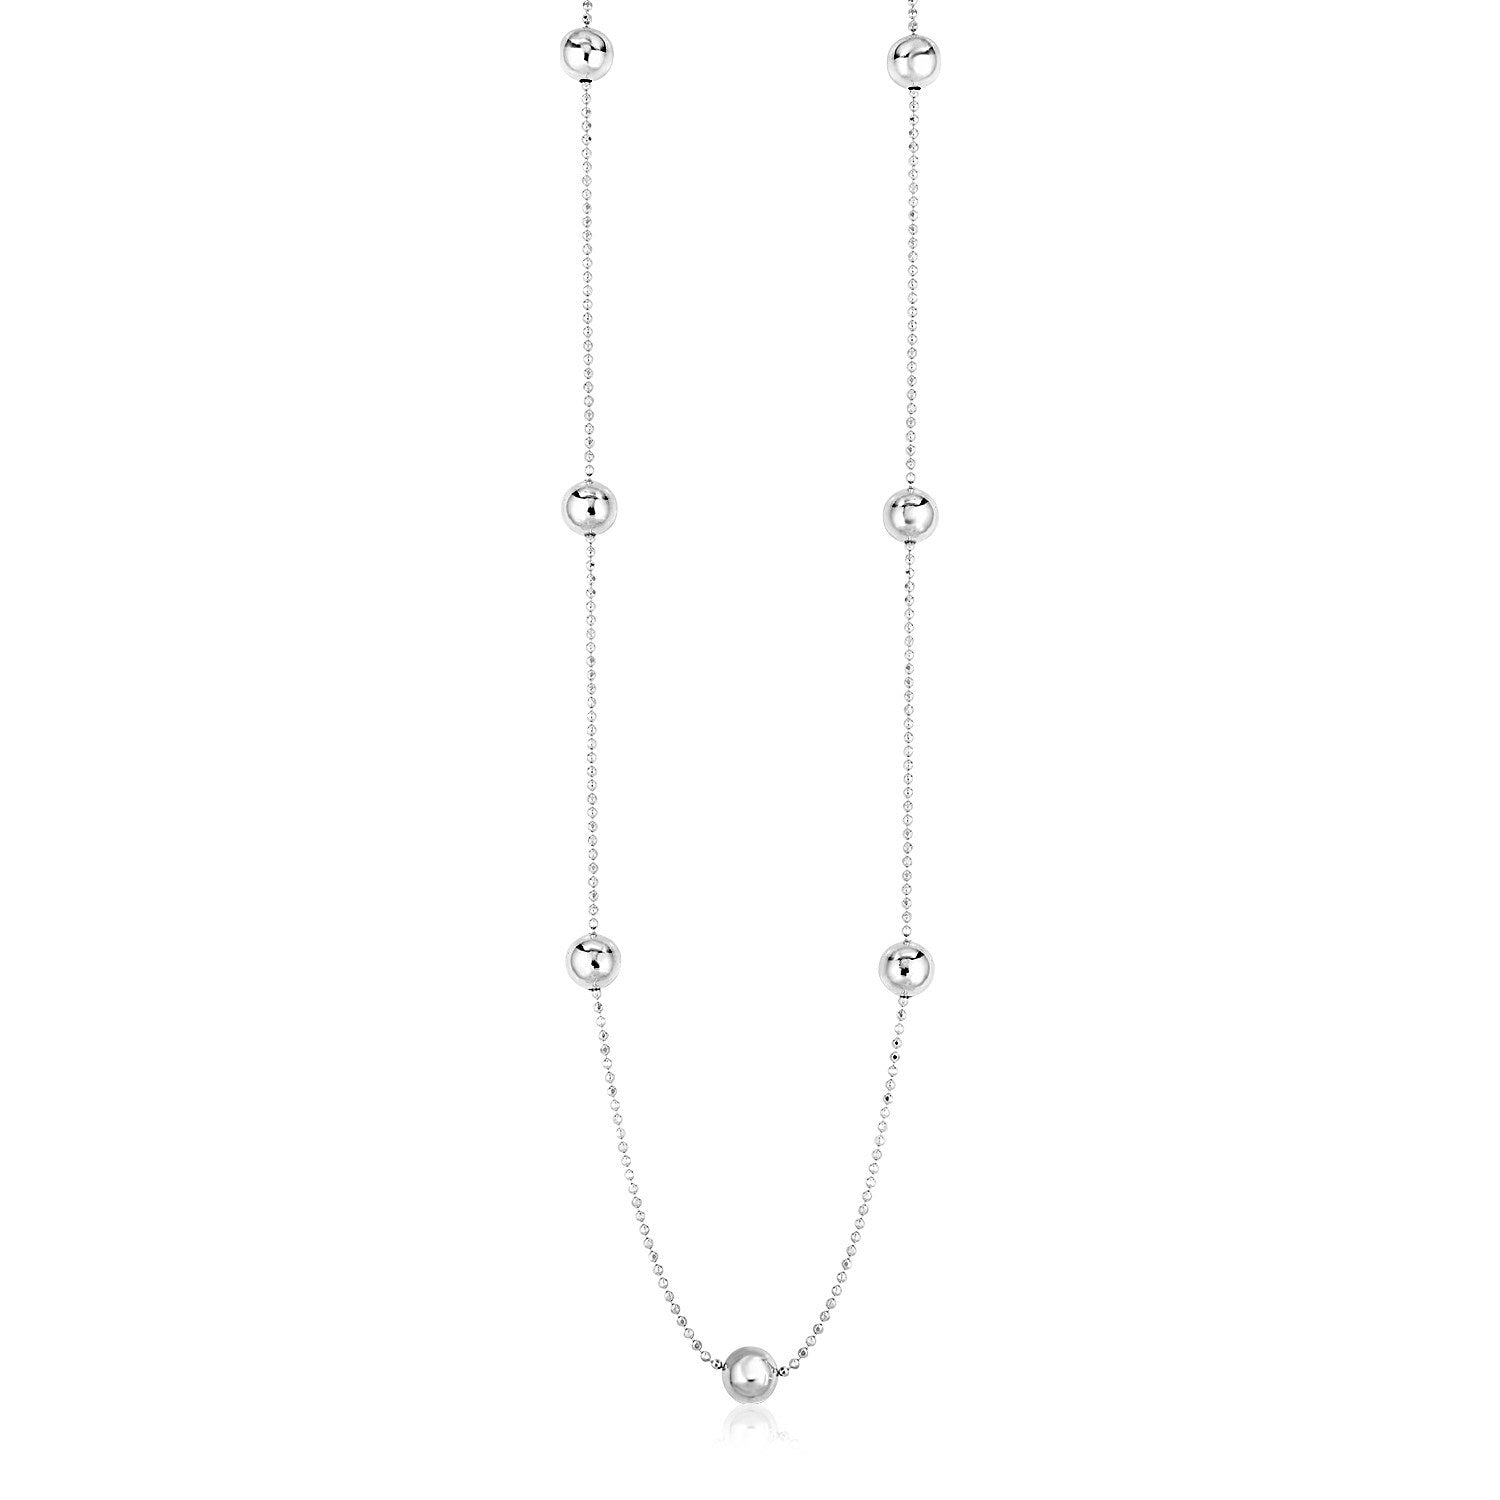 Sterling Silver Station Necklace with Large Polished Beads, size 24''